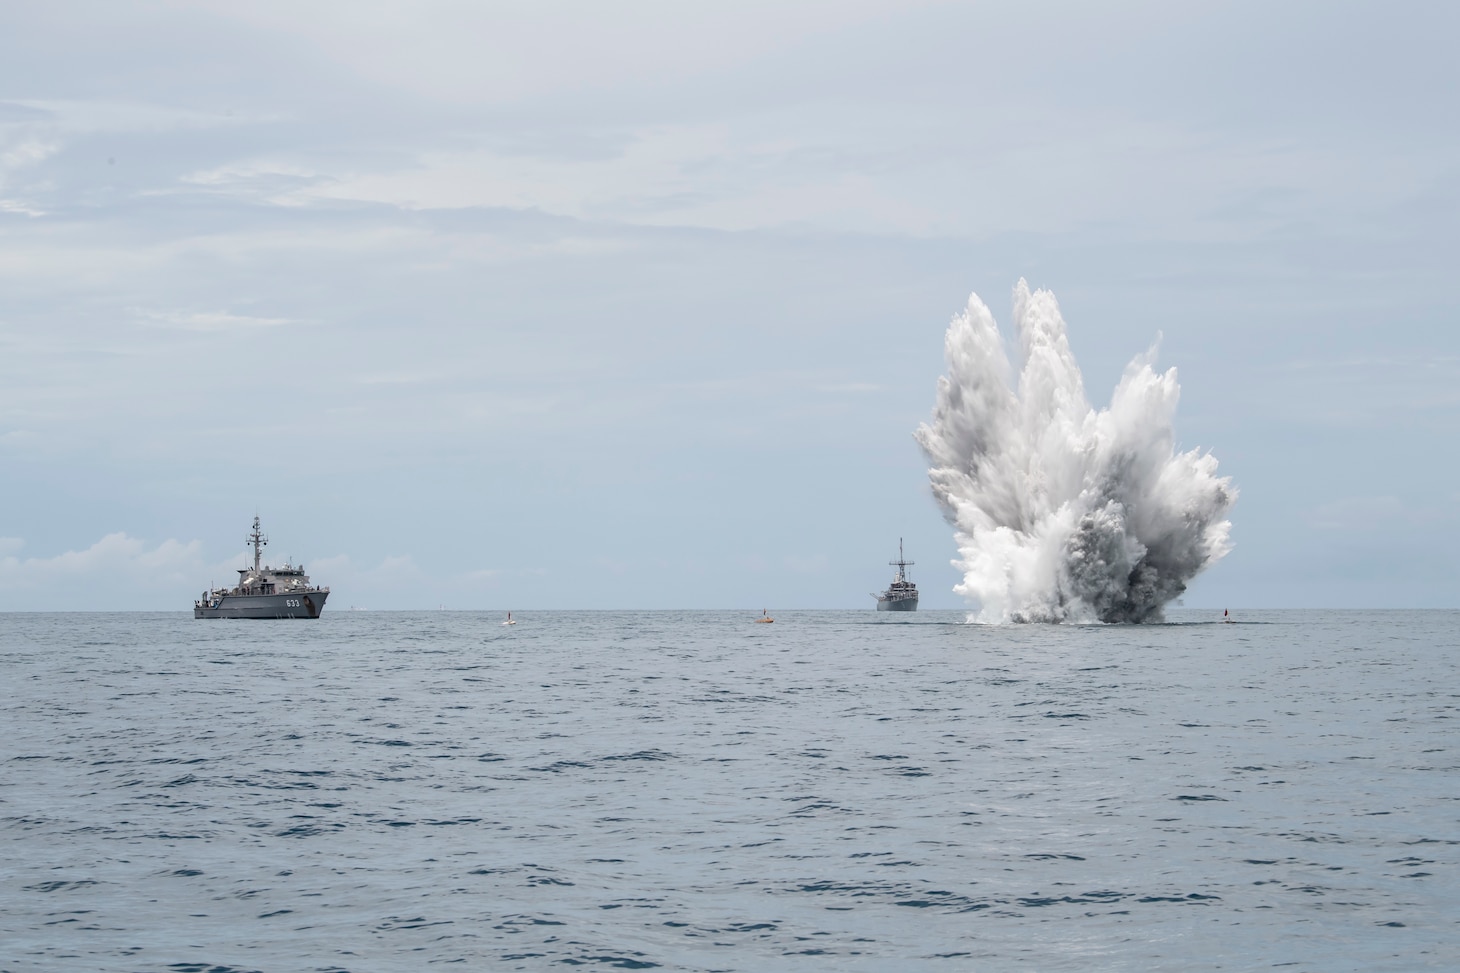 This year marks the 25th iteration of CARAT, a multinational exercise series designed to enhance U.S. and partner navies' abilities to operate together in response to traditional and non-traditional maritime security challenges in the Indo-Pacific region.